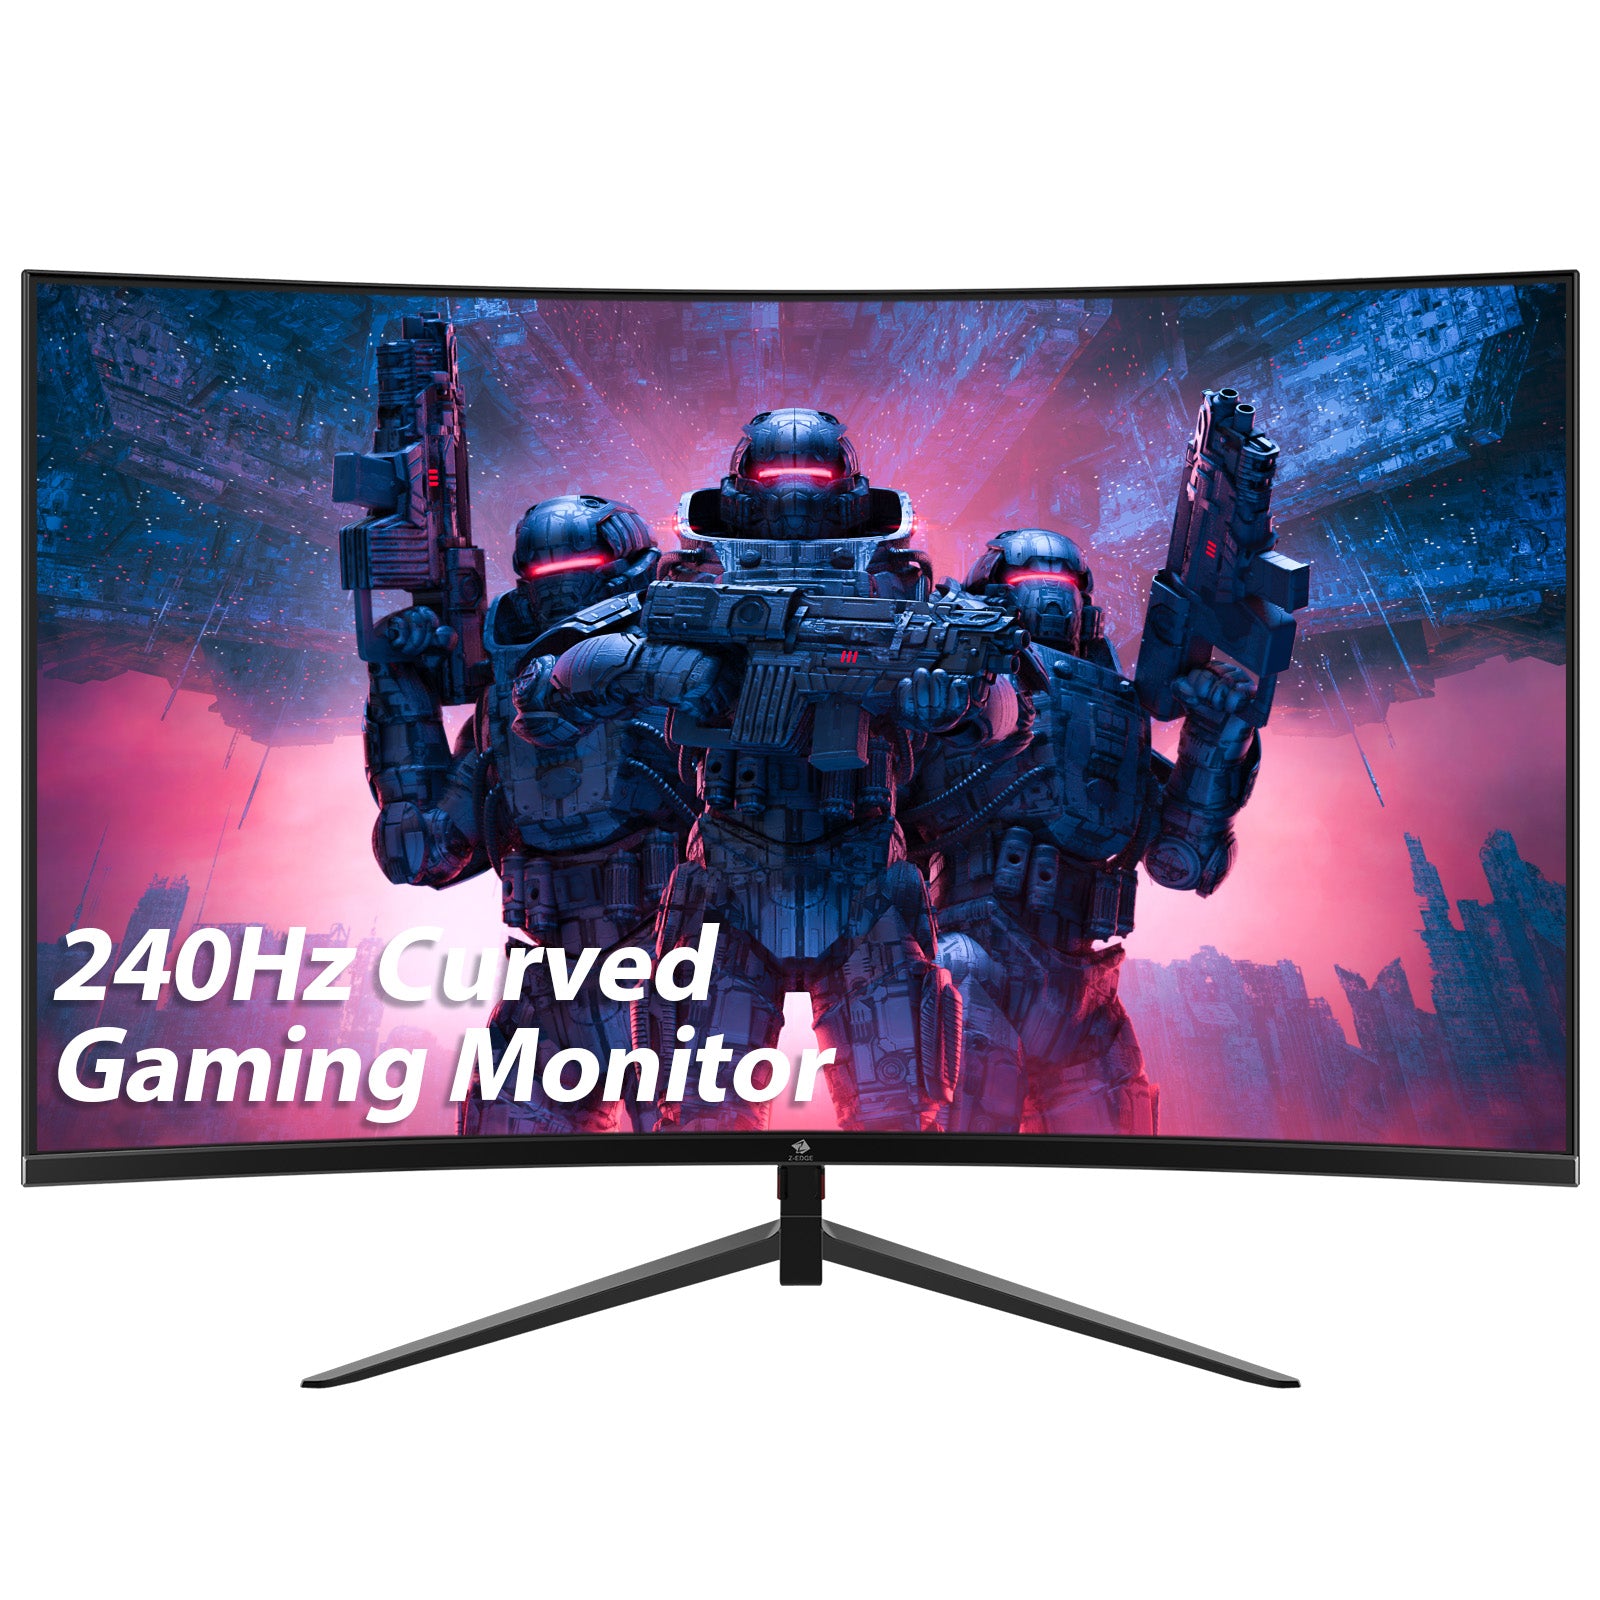 Z-Edge UG27P 27 Curved Gaming Monitor 240Hz 1ms 1920x1080 16:9 Frameless,  Support AMD Freesync Premium, With DisplayPort & HDMI Port